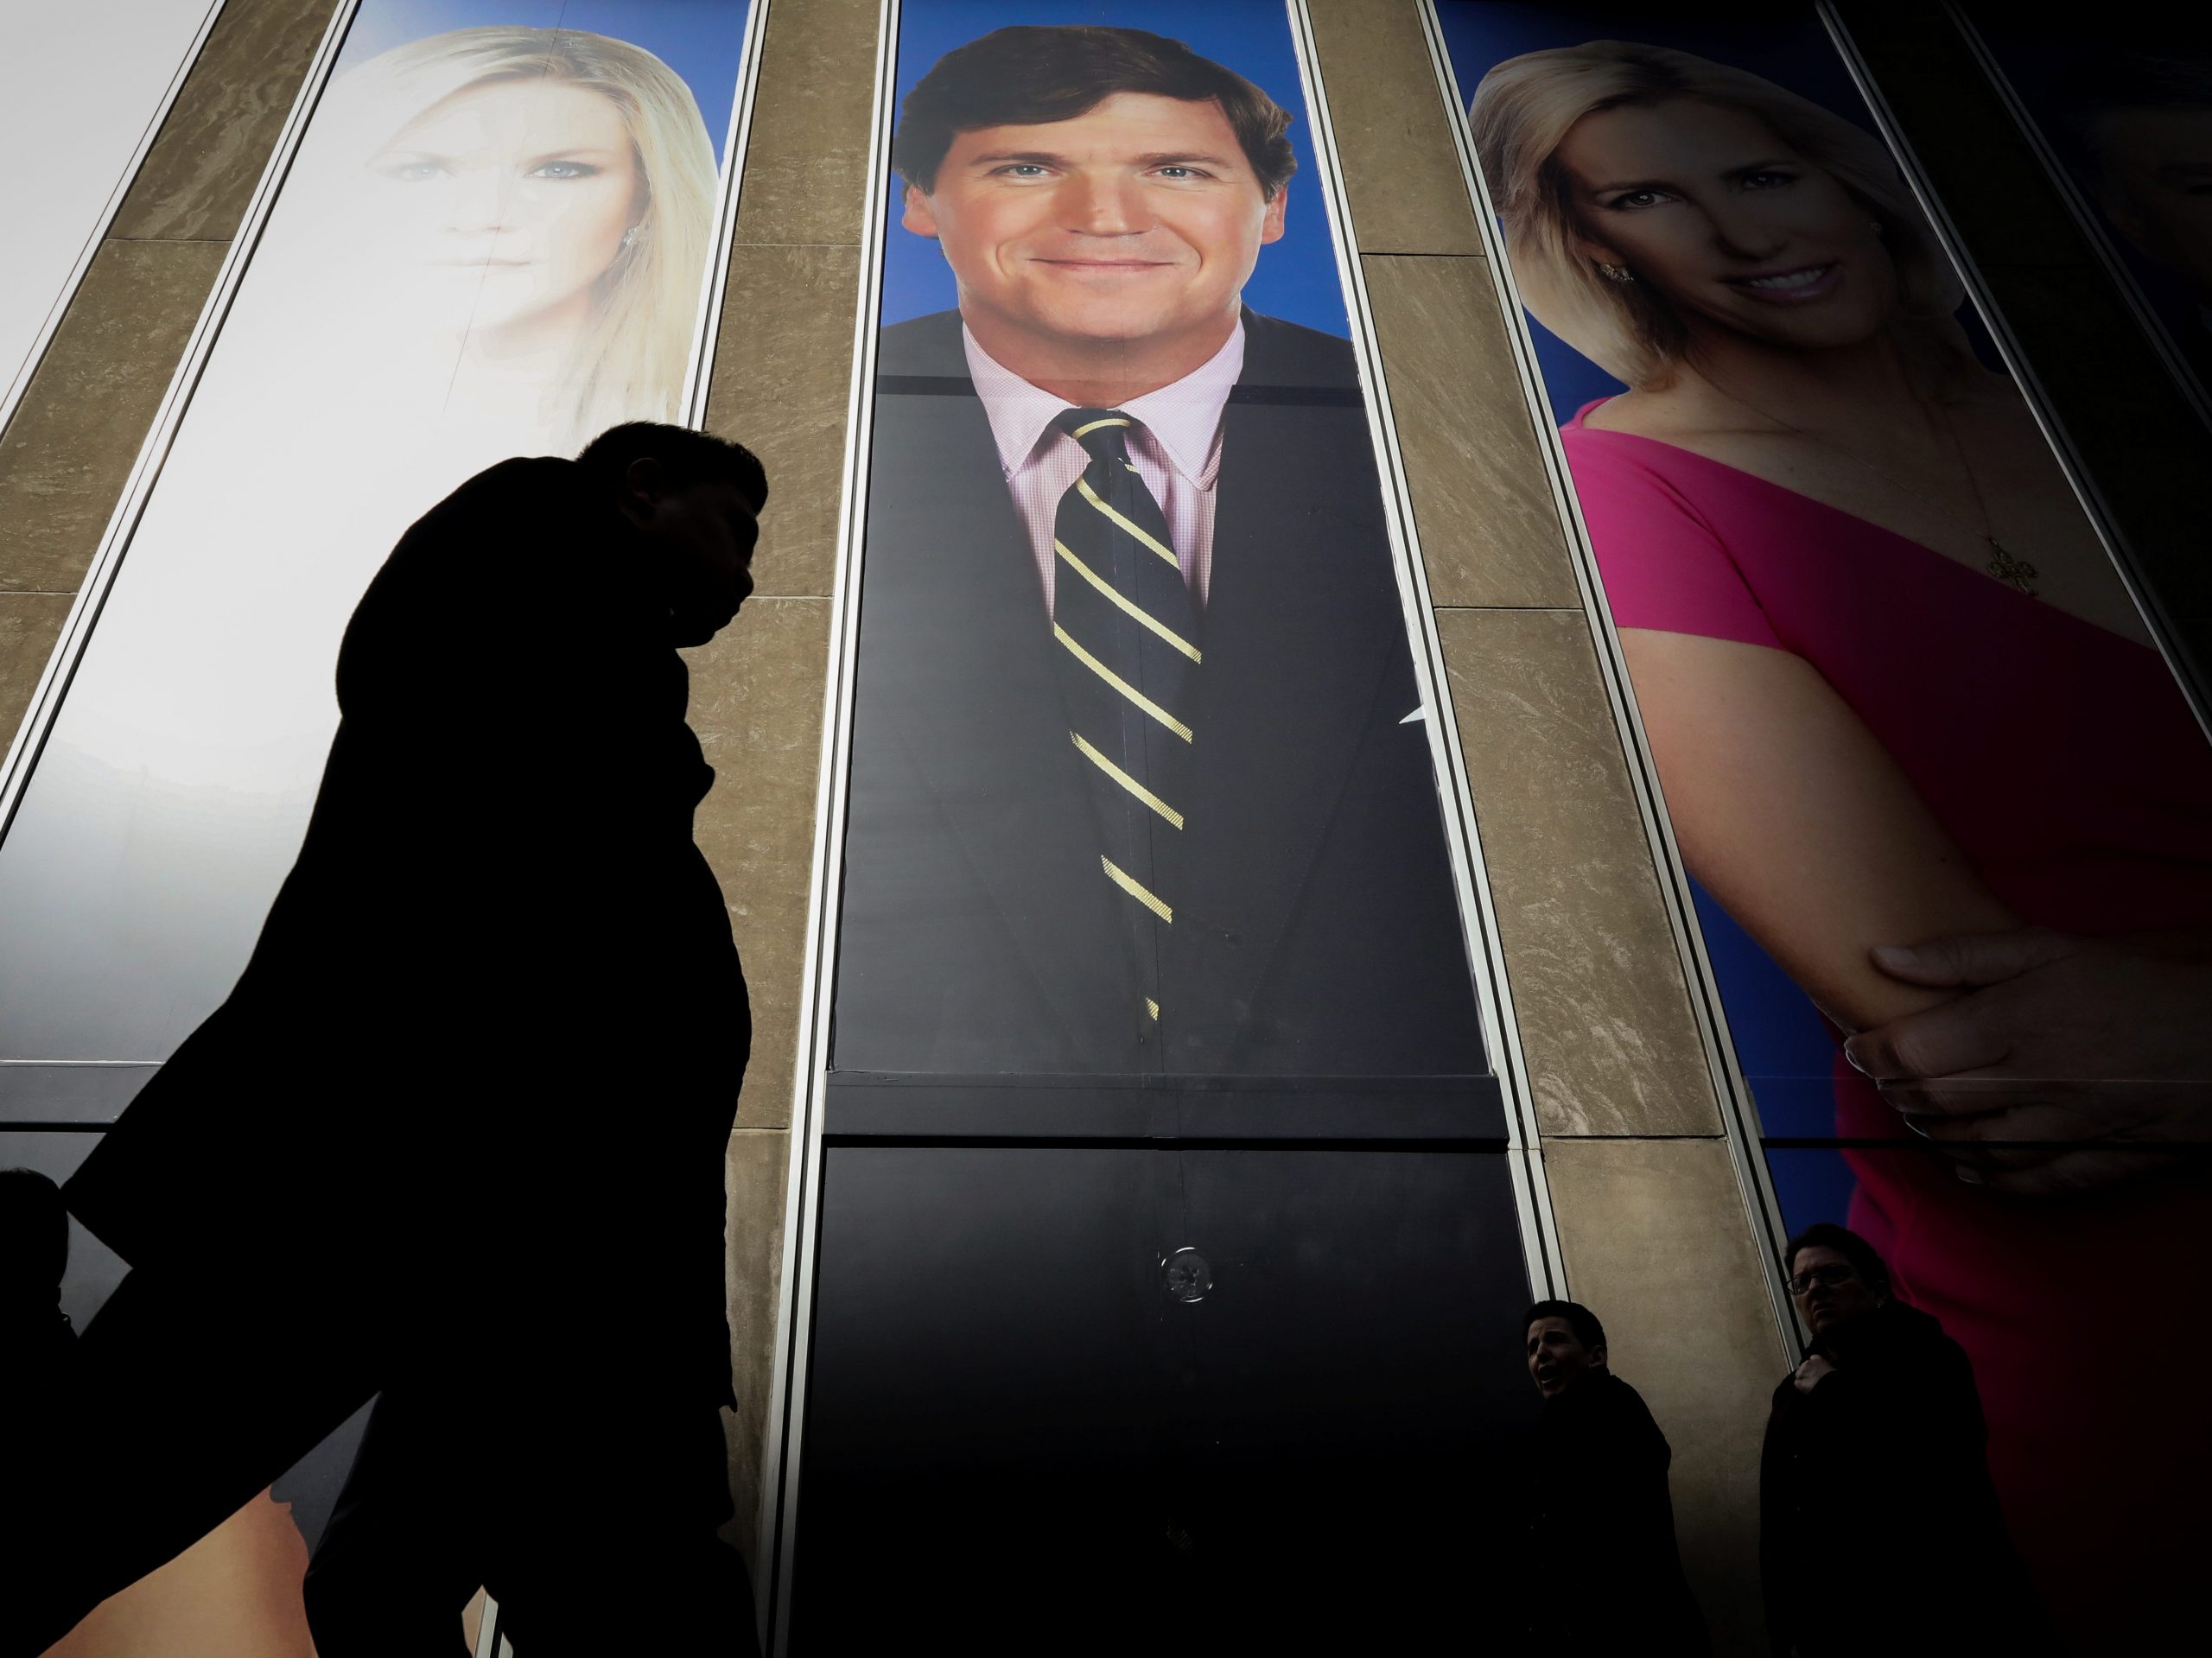 People pass by a promo of Fox News host Tucker Carlson on the News Corporation building in New York, US, March 13, 2019.